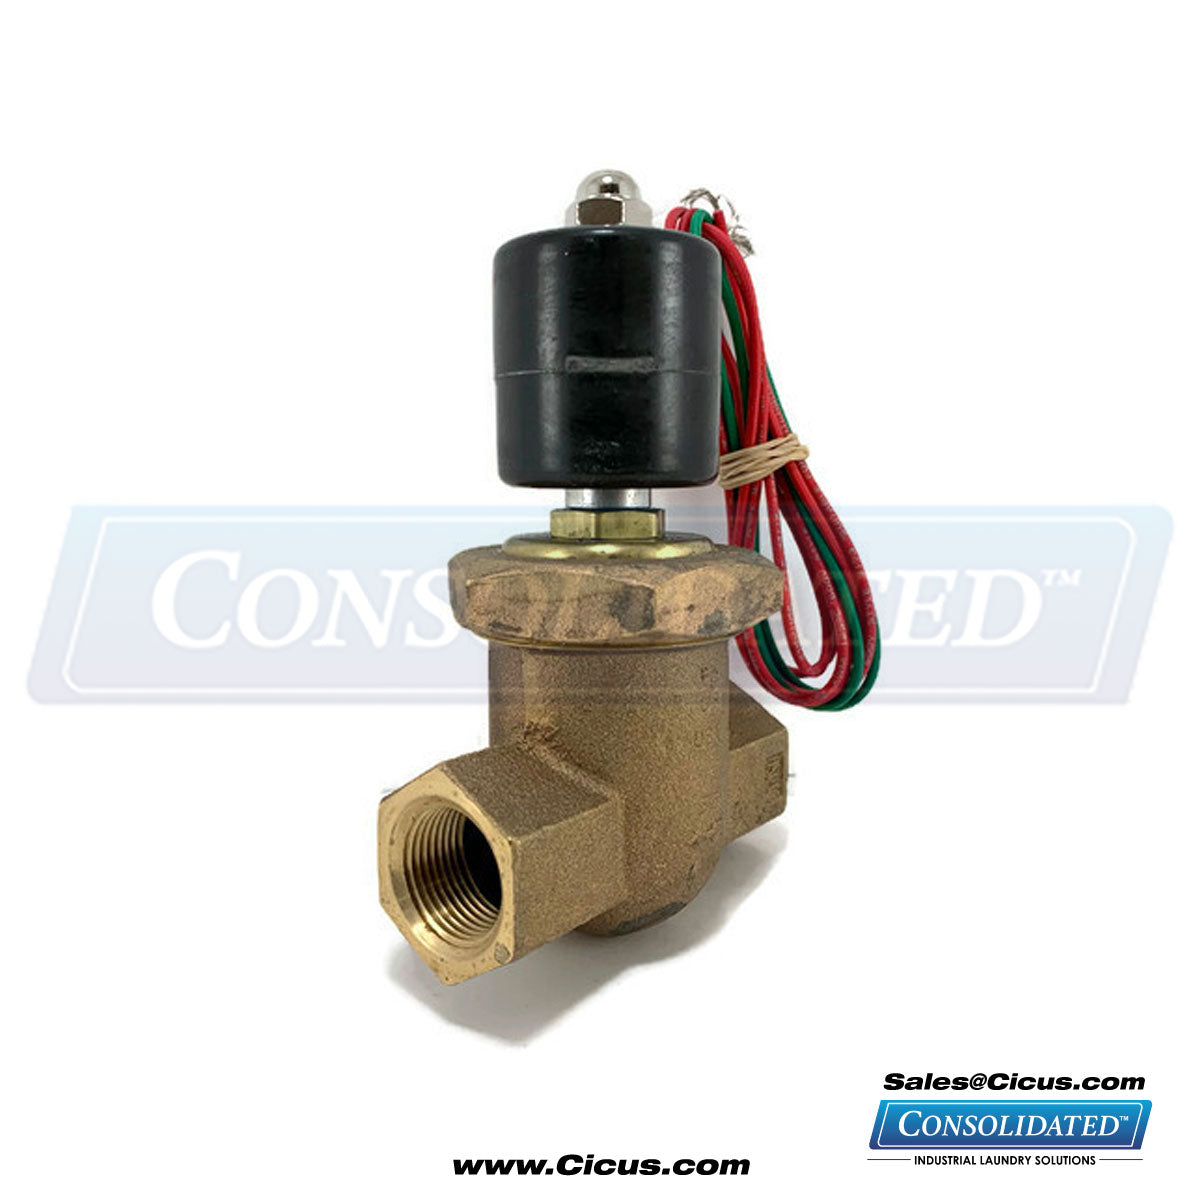 Milnor Compatible 3/4" Valve with Coil 240V 50/60Hz - 6-2110IS-240 [96P053A71]